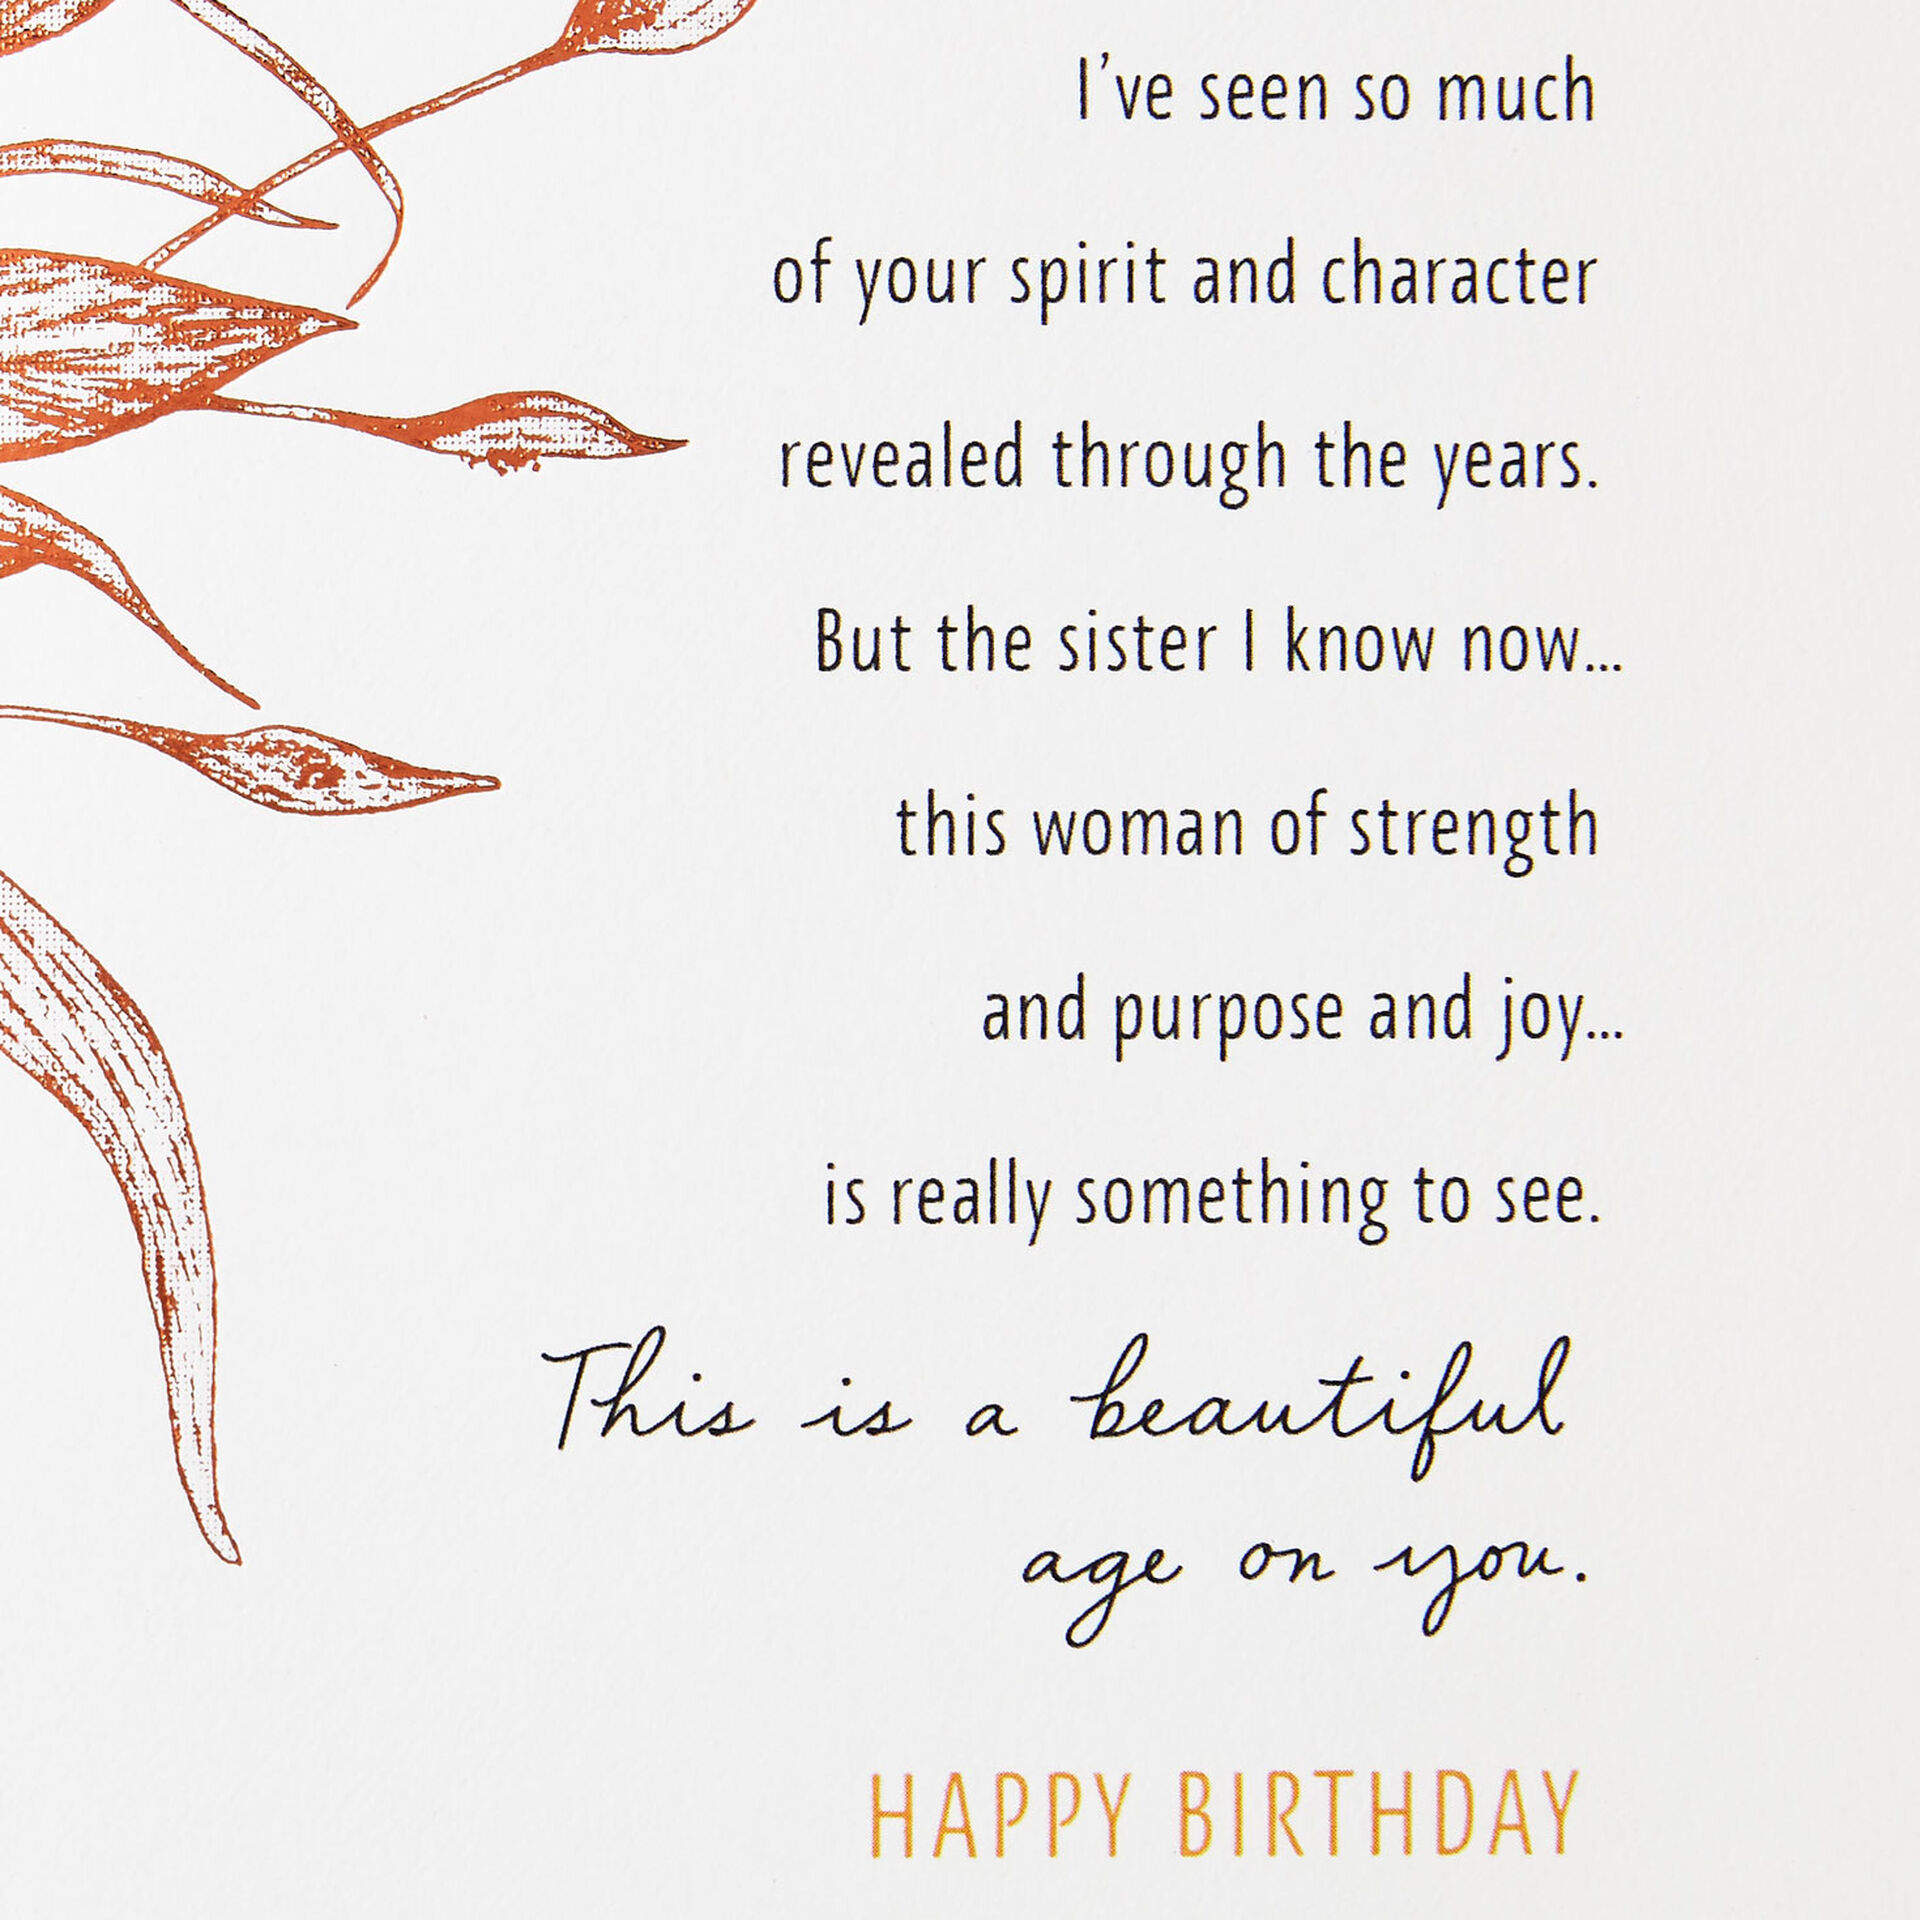 Leaves-and-Lettering-Birthday-Card-for-Sister_599FBD4297_02